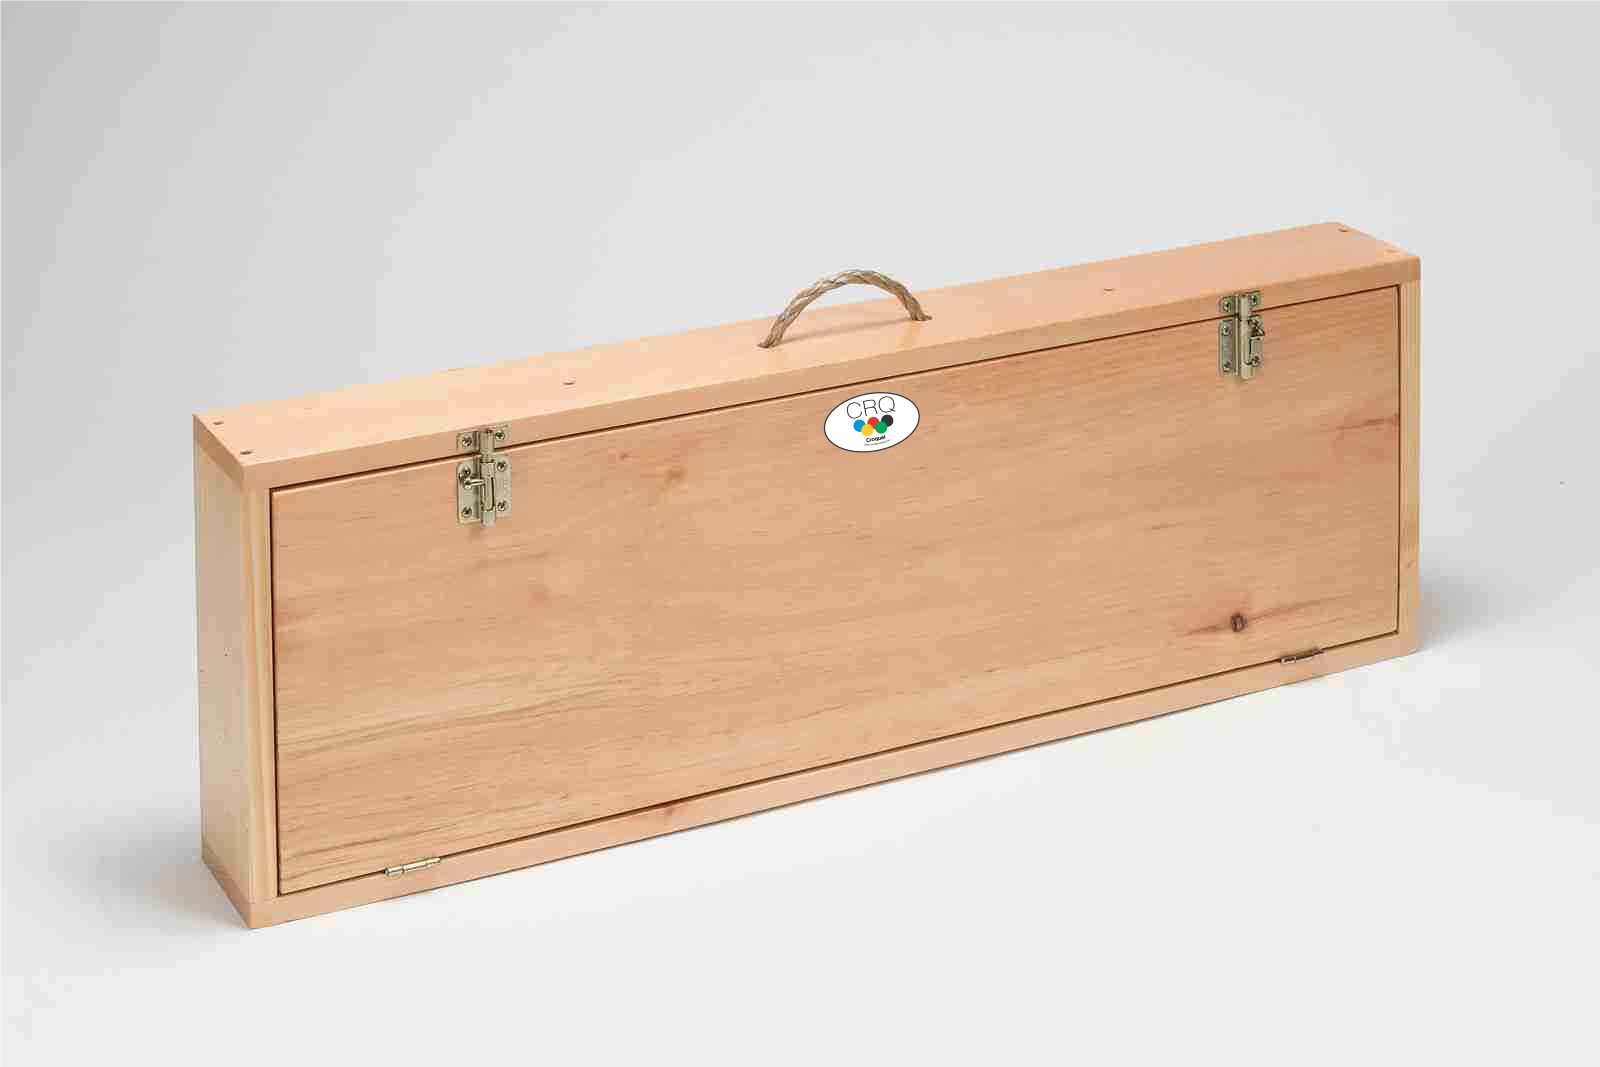 CRQ 114 Wooden Case Deluxe CRQ Amish